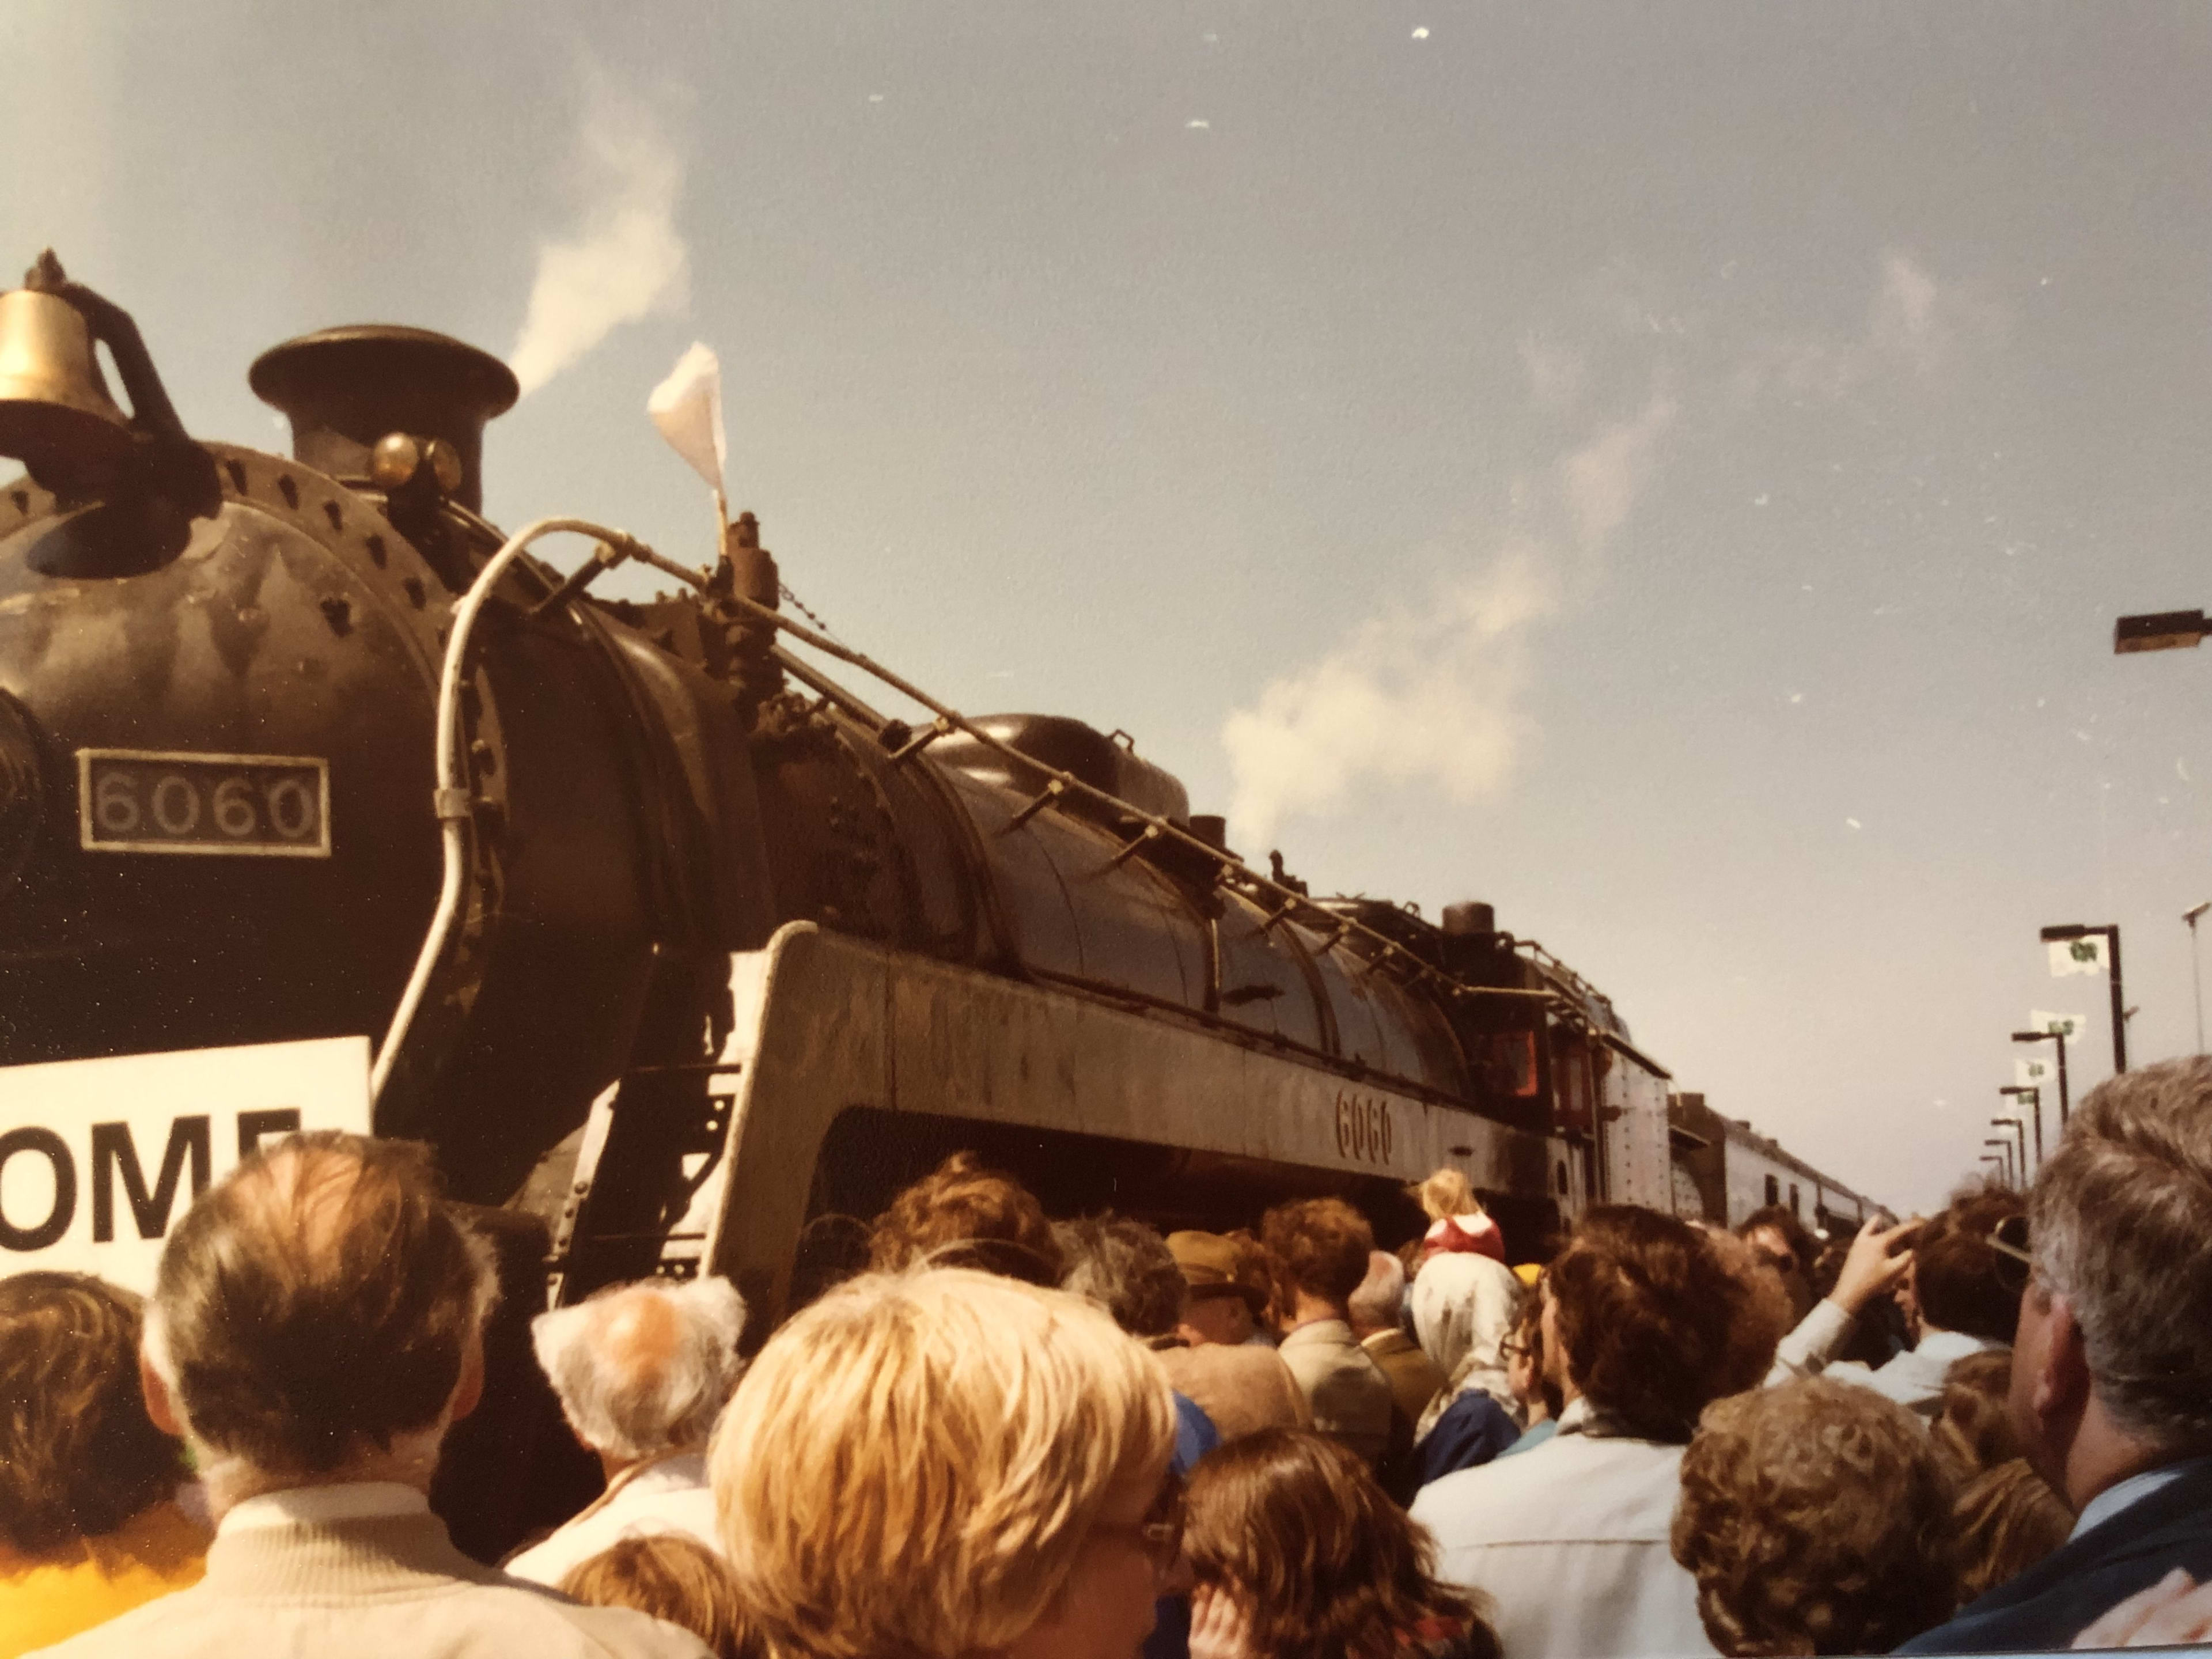 Crowds gather to see an historic train arrive at the station.